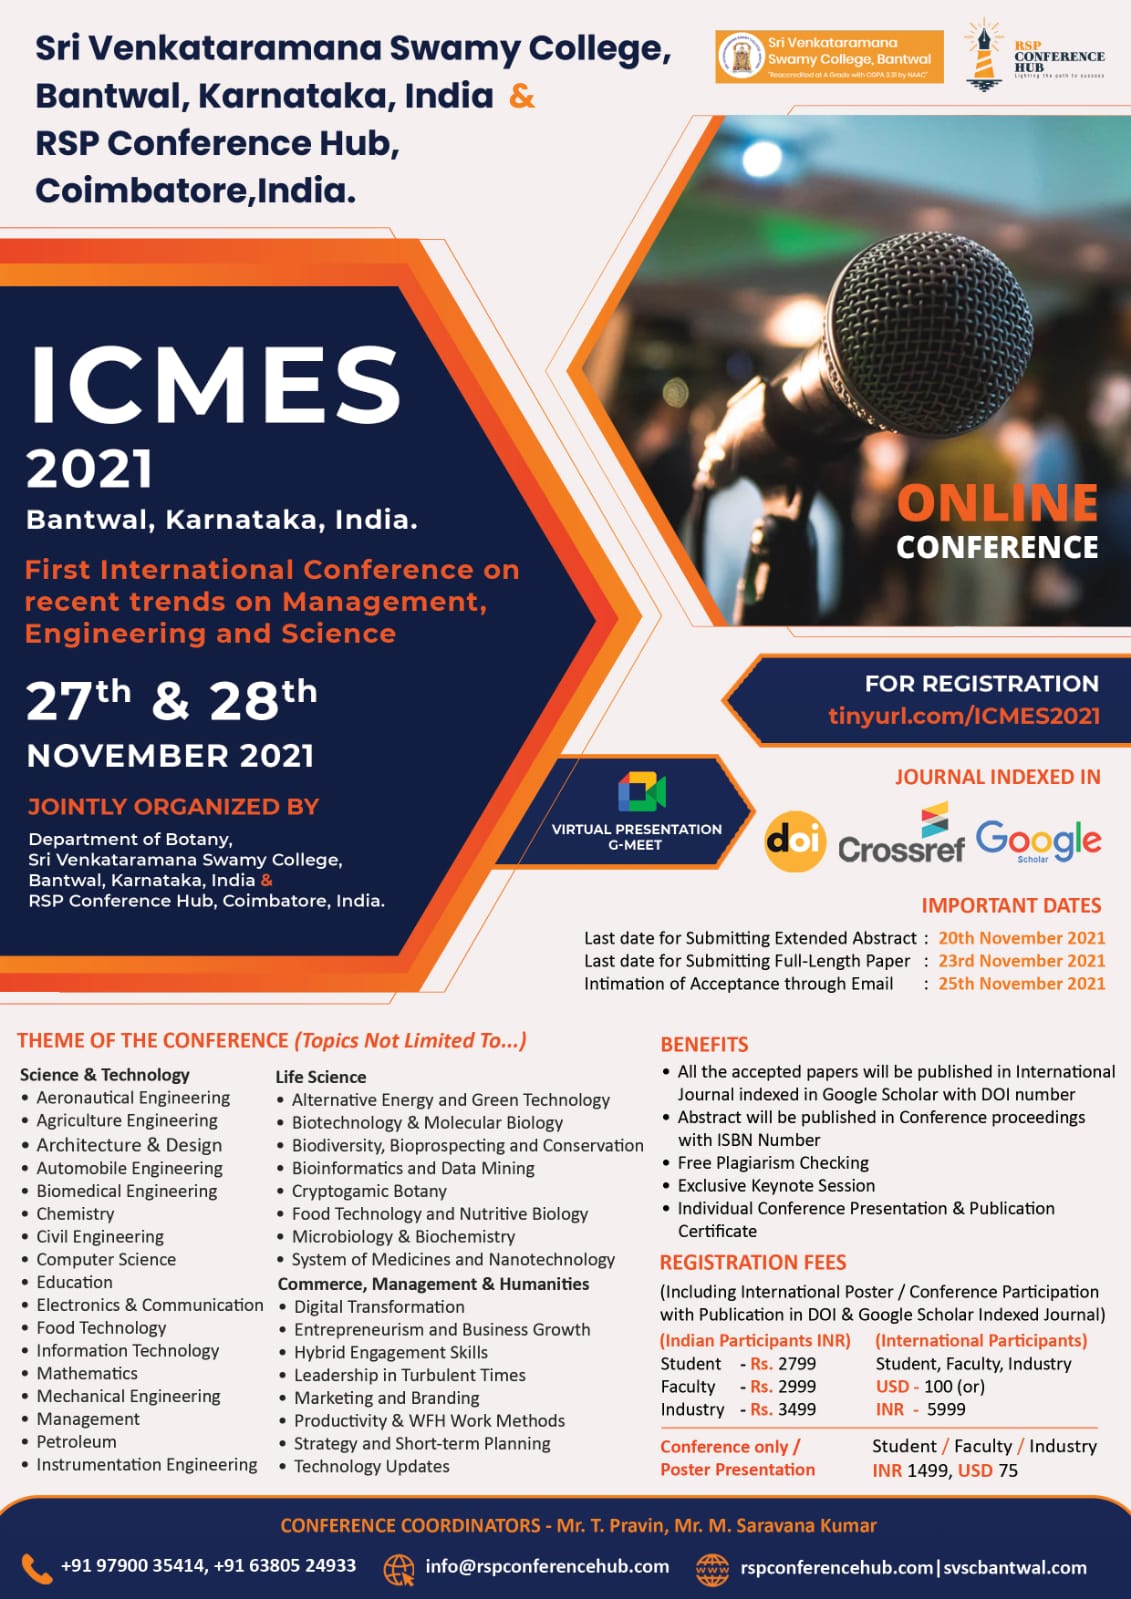 First International Conference on recent trends on Management, Engineering and Sciences ICMES 2021